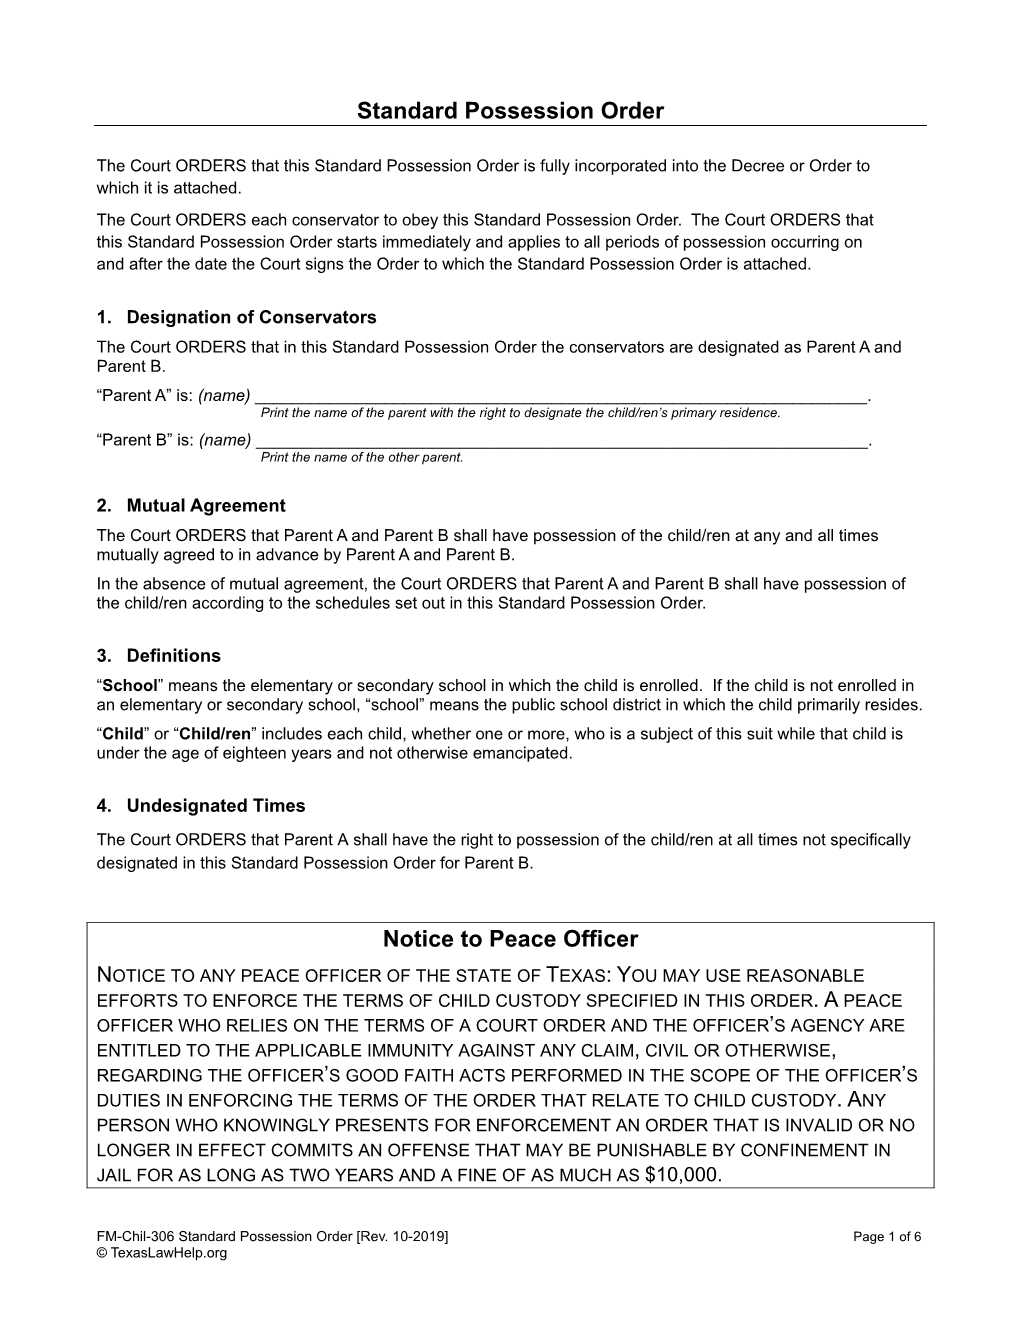 Standard Possession Order Notice to Peace Officer